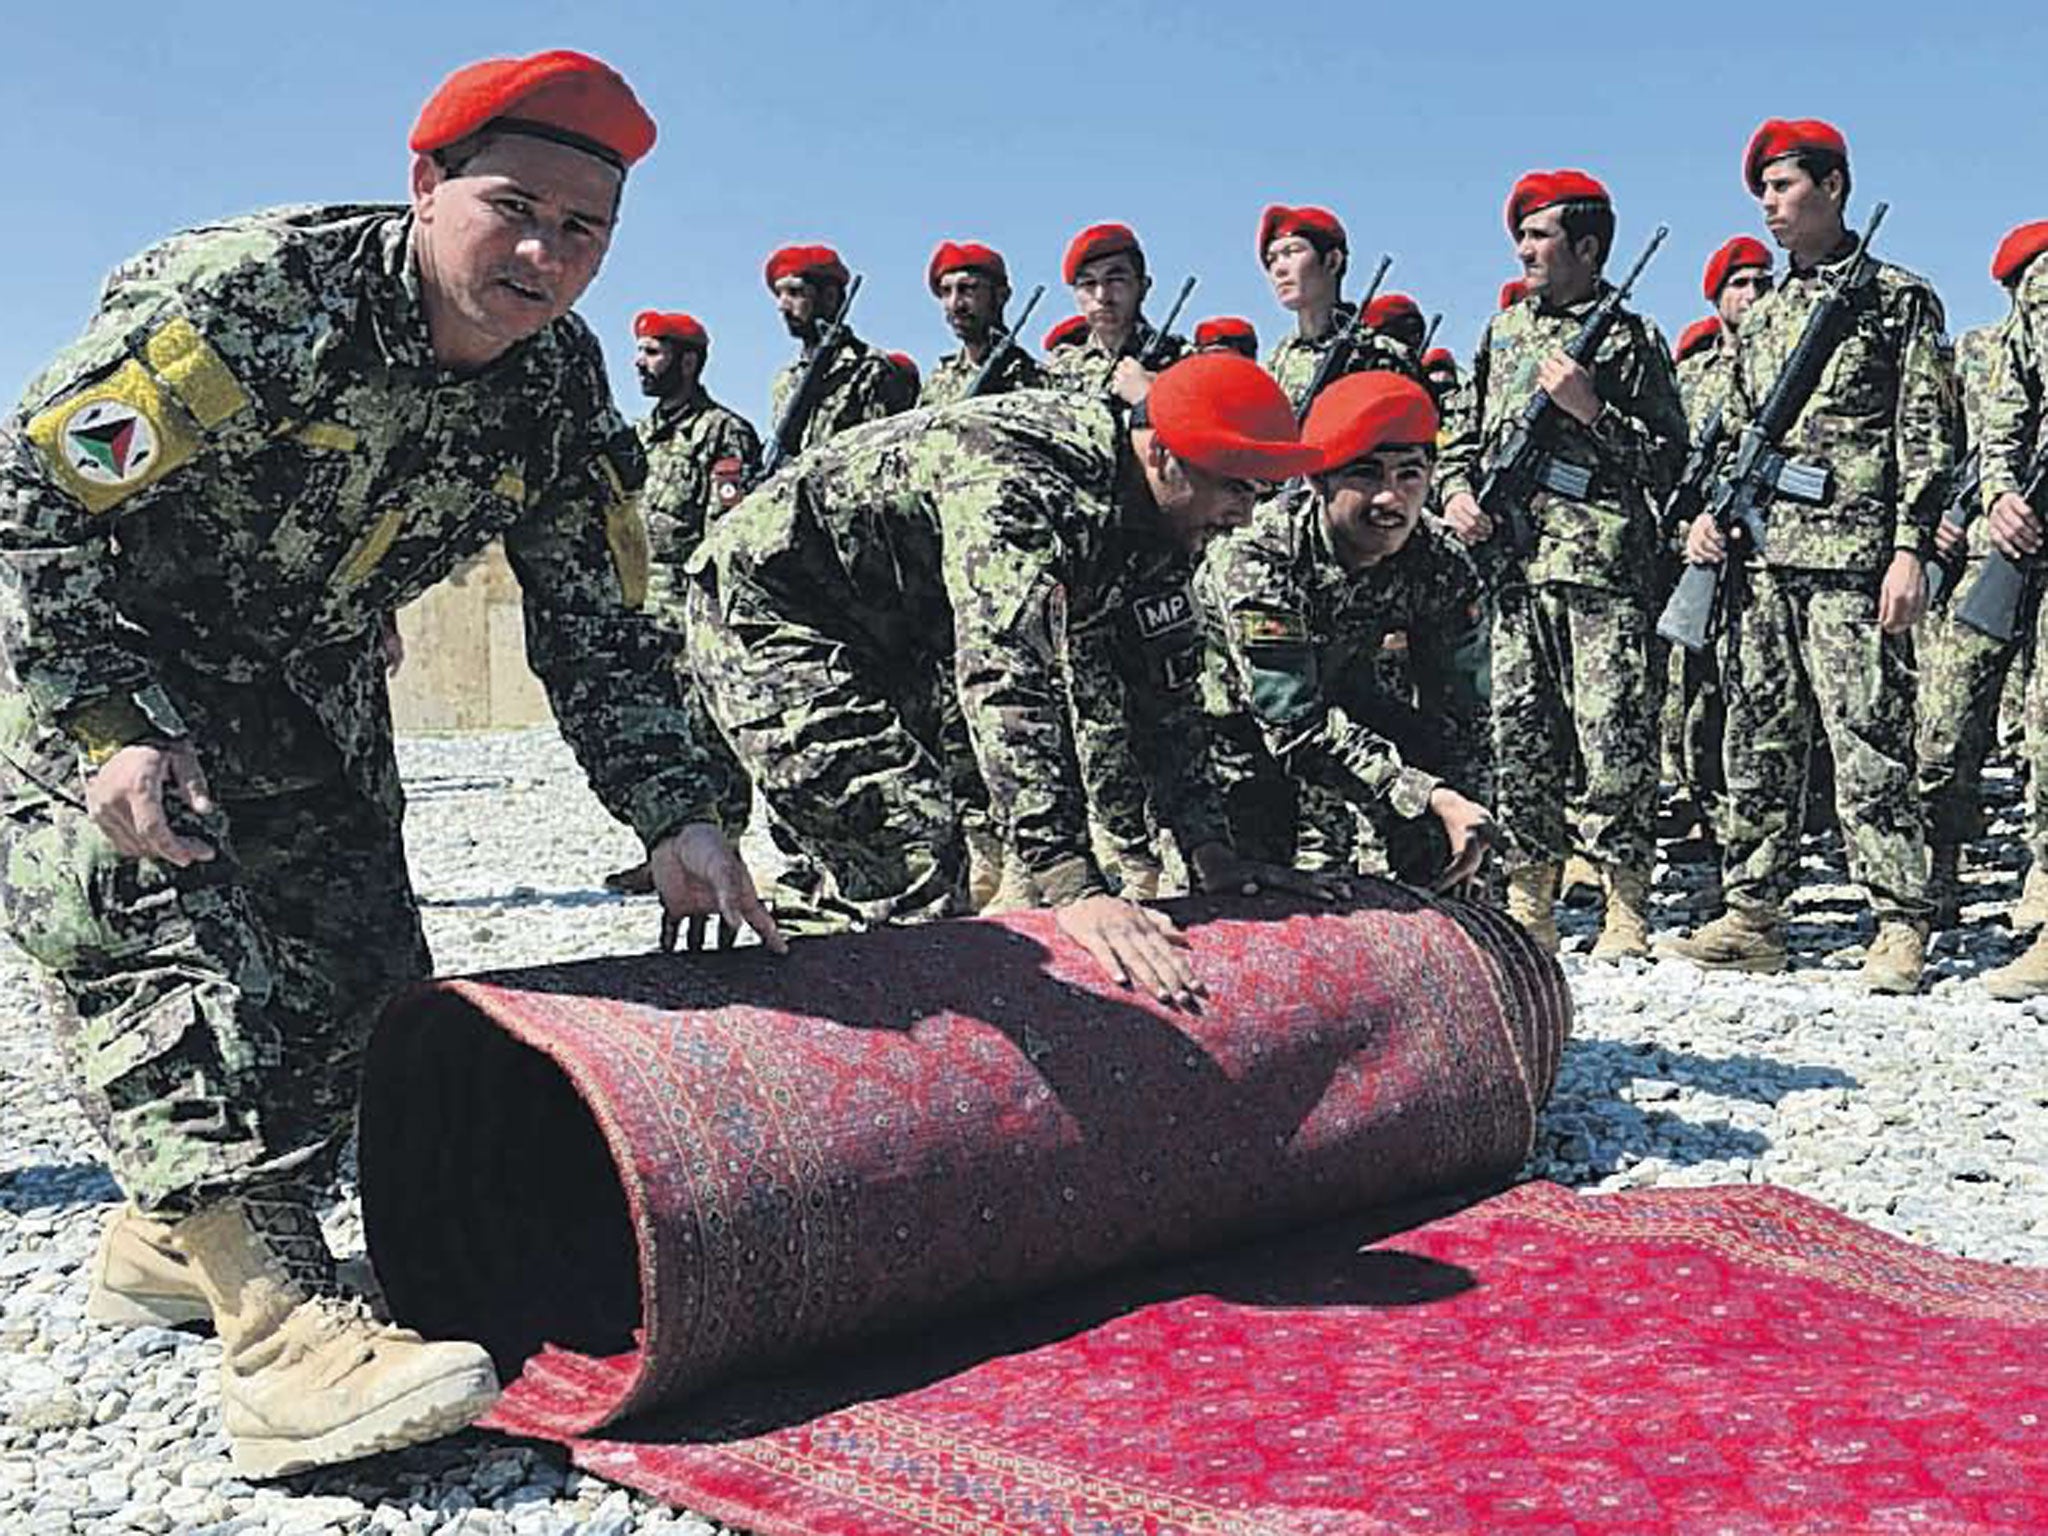 Afghan soldiers roll out a red carpet before a ceremony to hand over Bagram prison to AfghanistanAfghan soldiers roll out a red carpet before a ceremony to hand over Bagram prison to Afghanistan